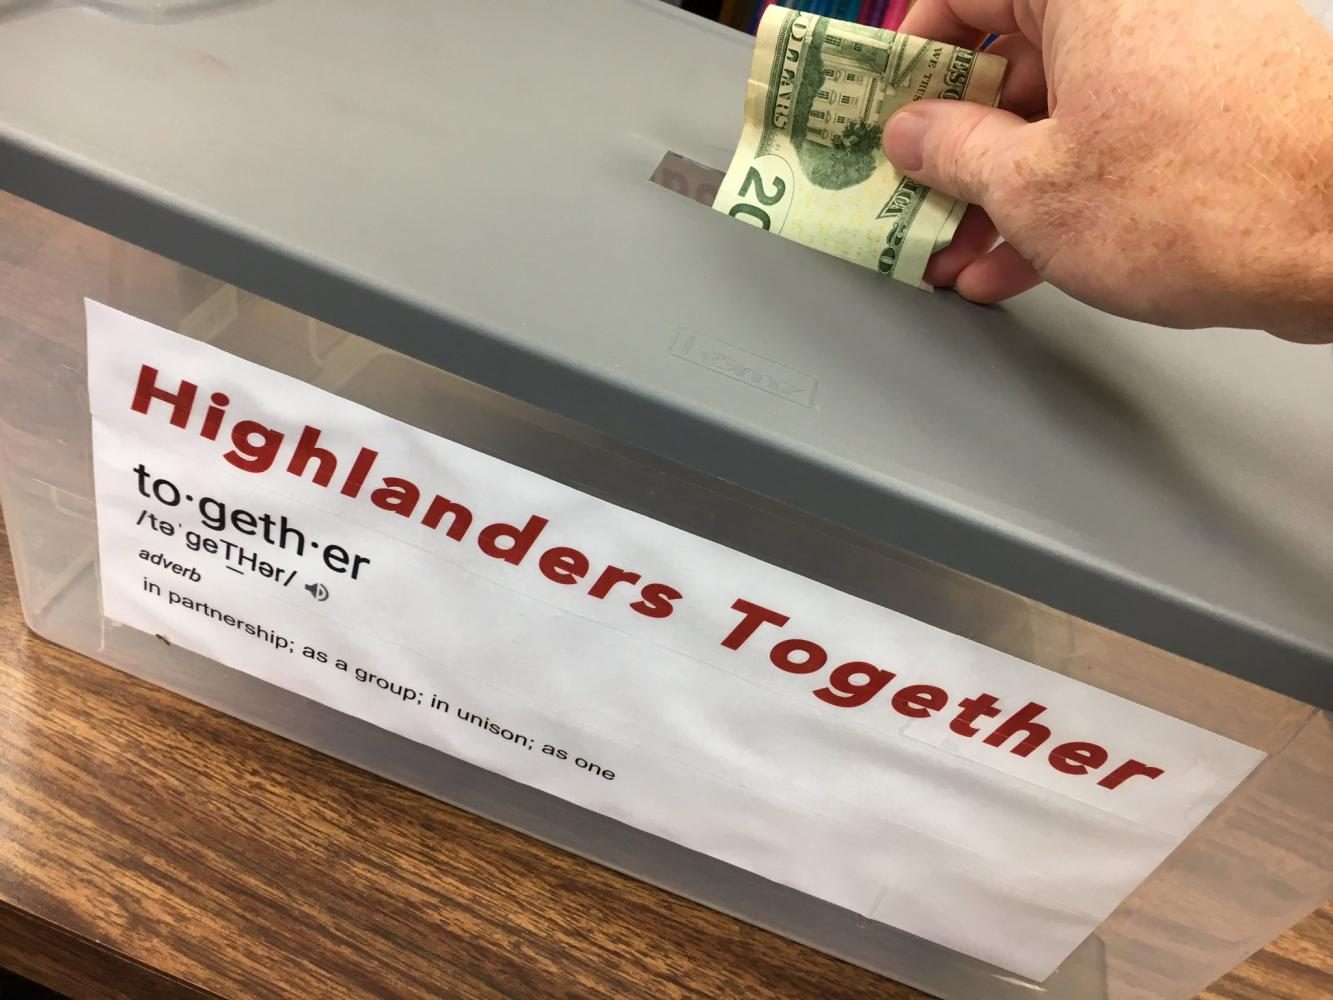 Mr. Brett Bowers, principal, donates to the Highlanders Together campaign.